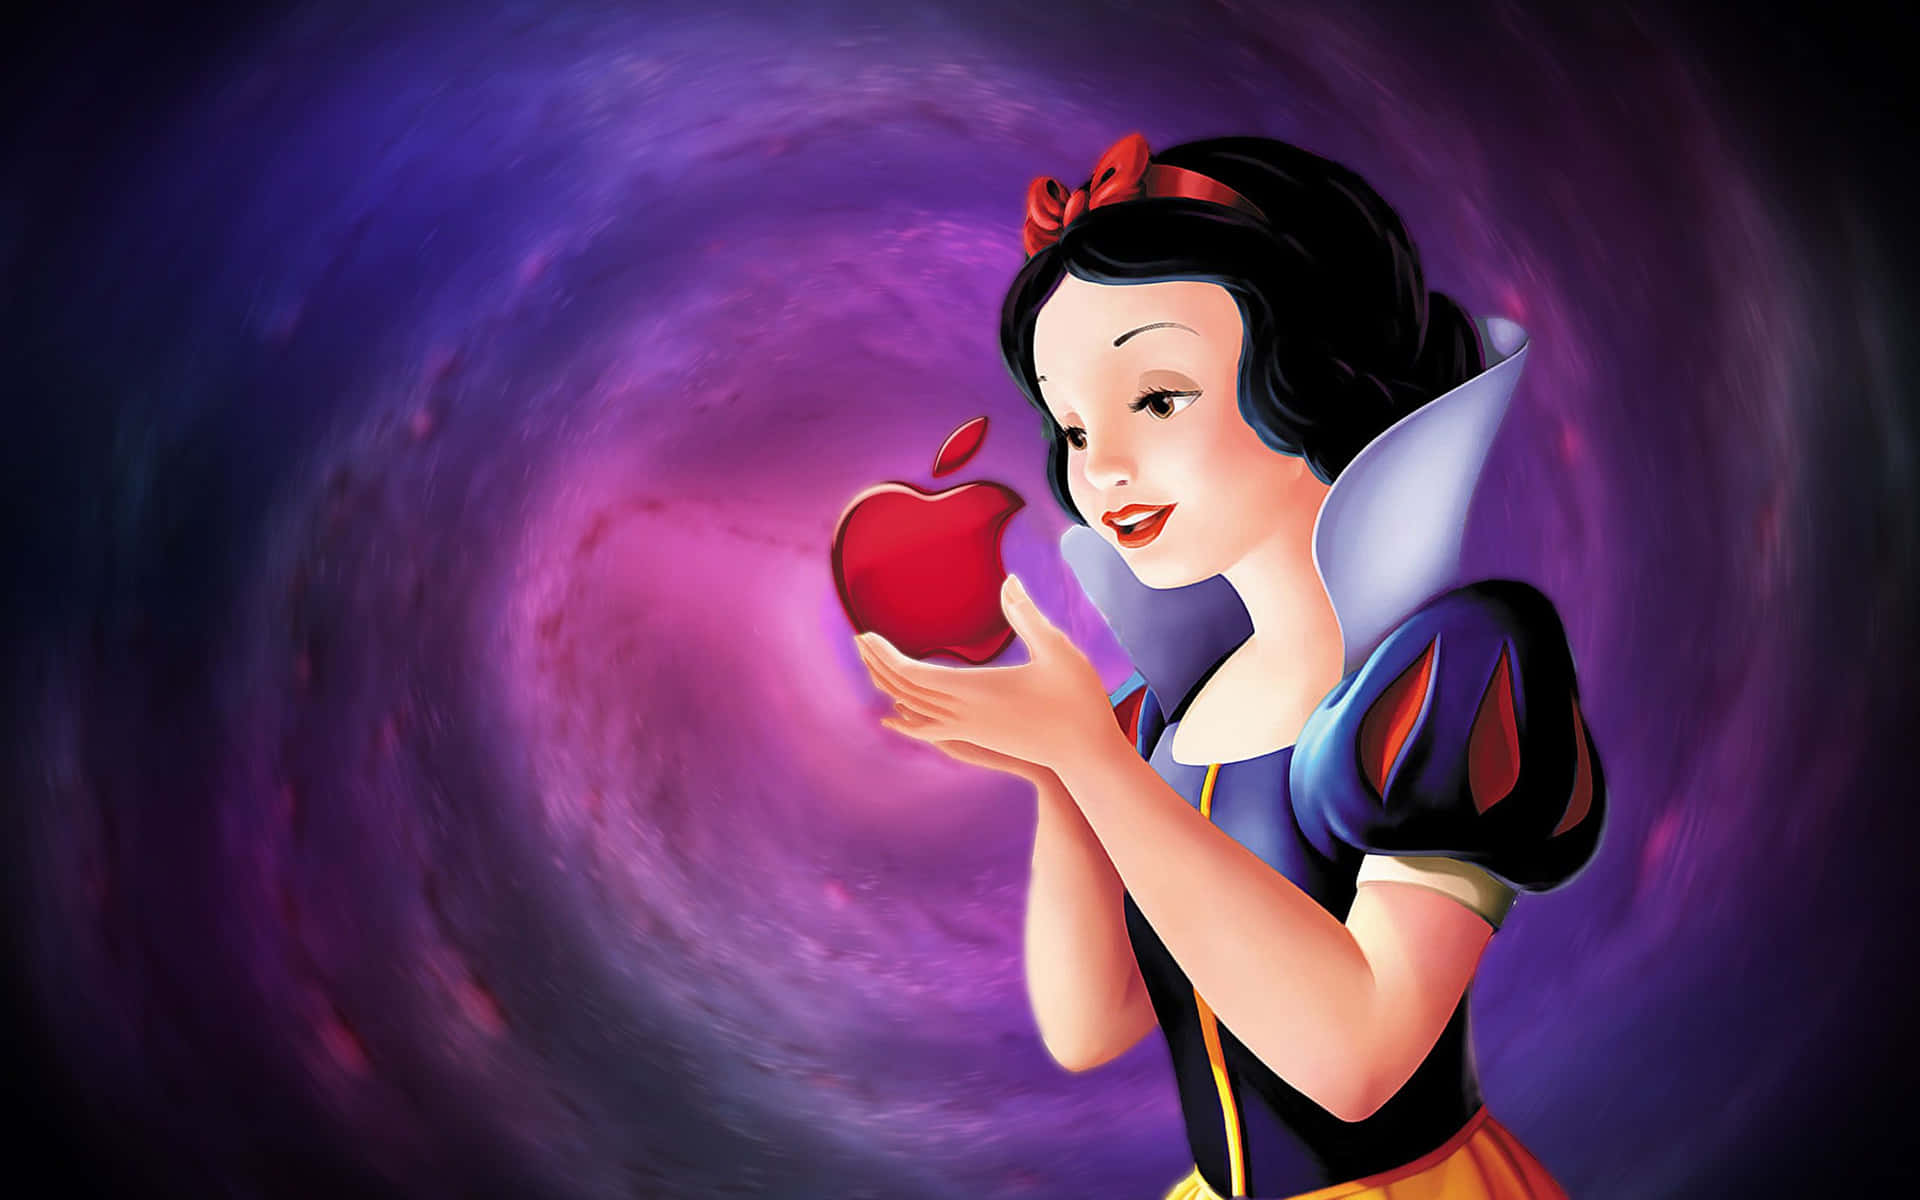 The Fairest of Them All: Snow White Glimmers in All Her Glory